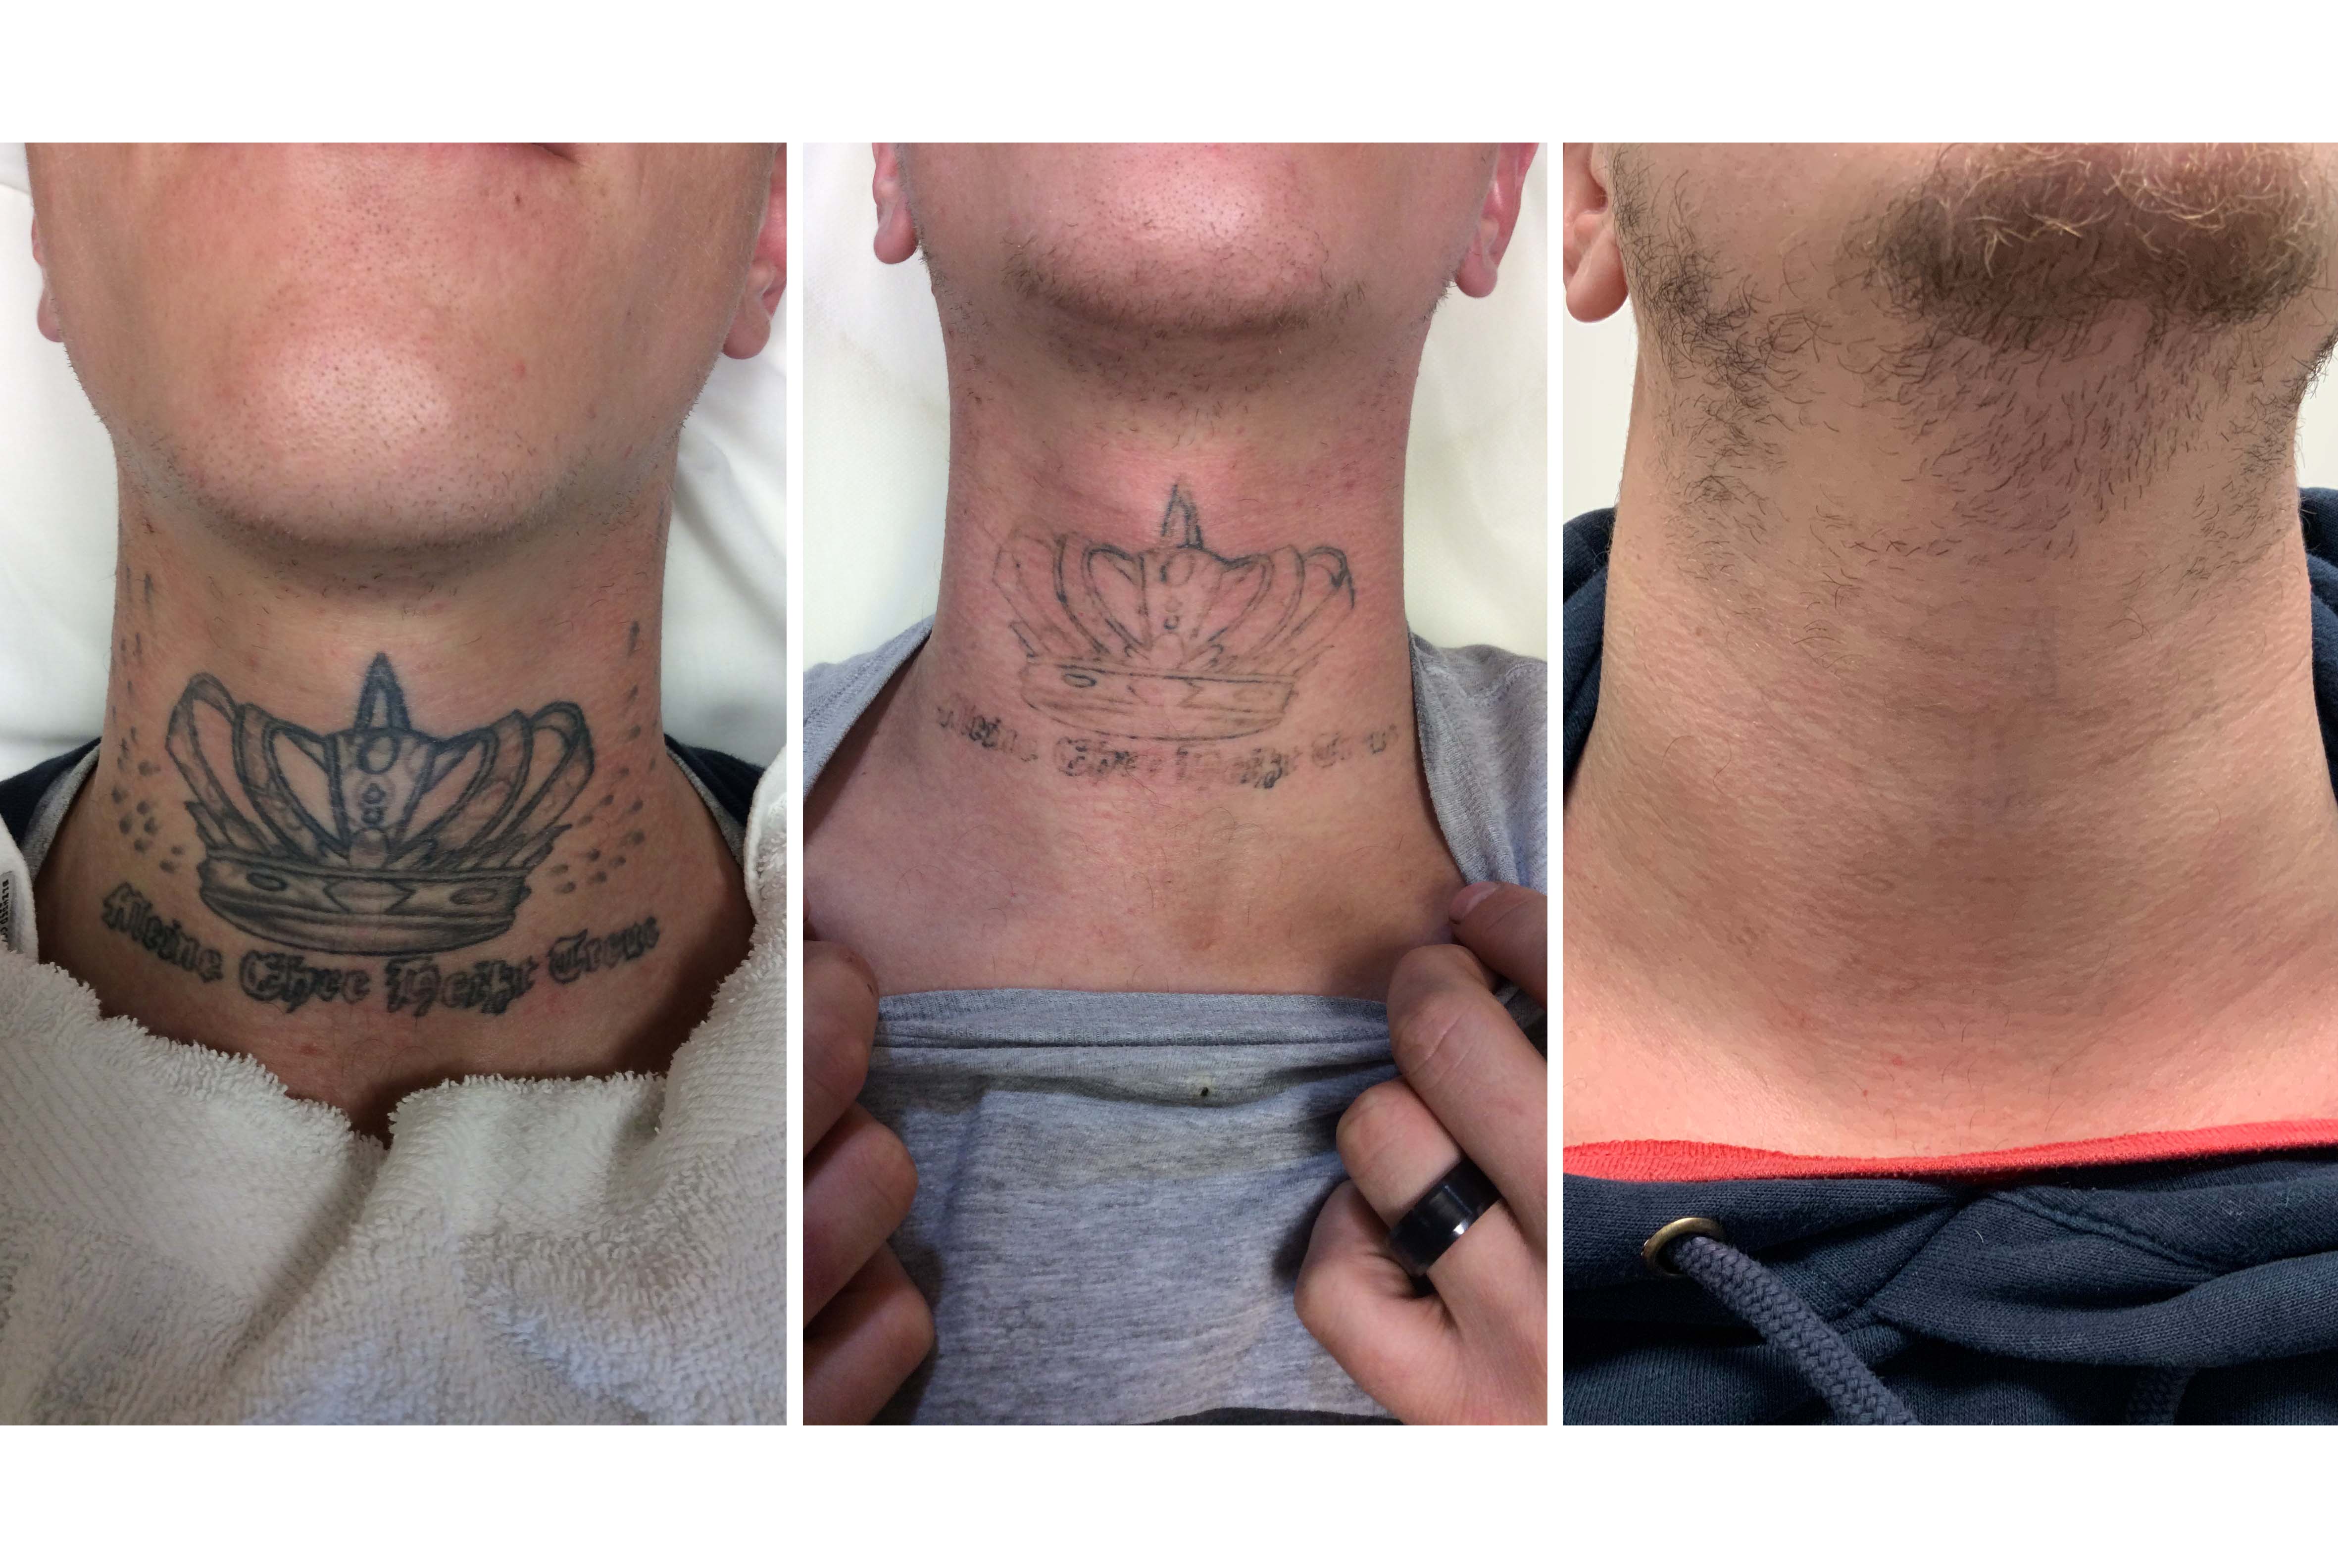 Tattoo Removal - Laser vs Saline · How do these treatments work?